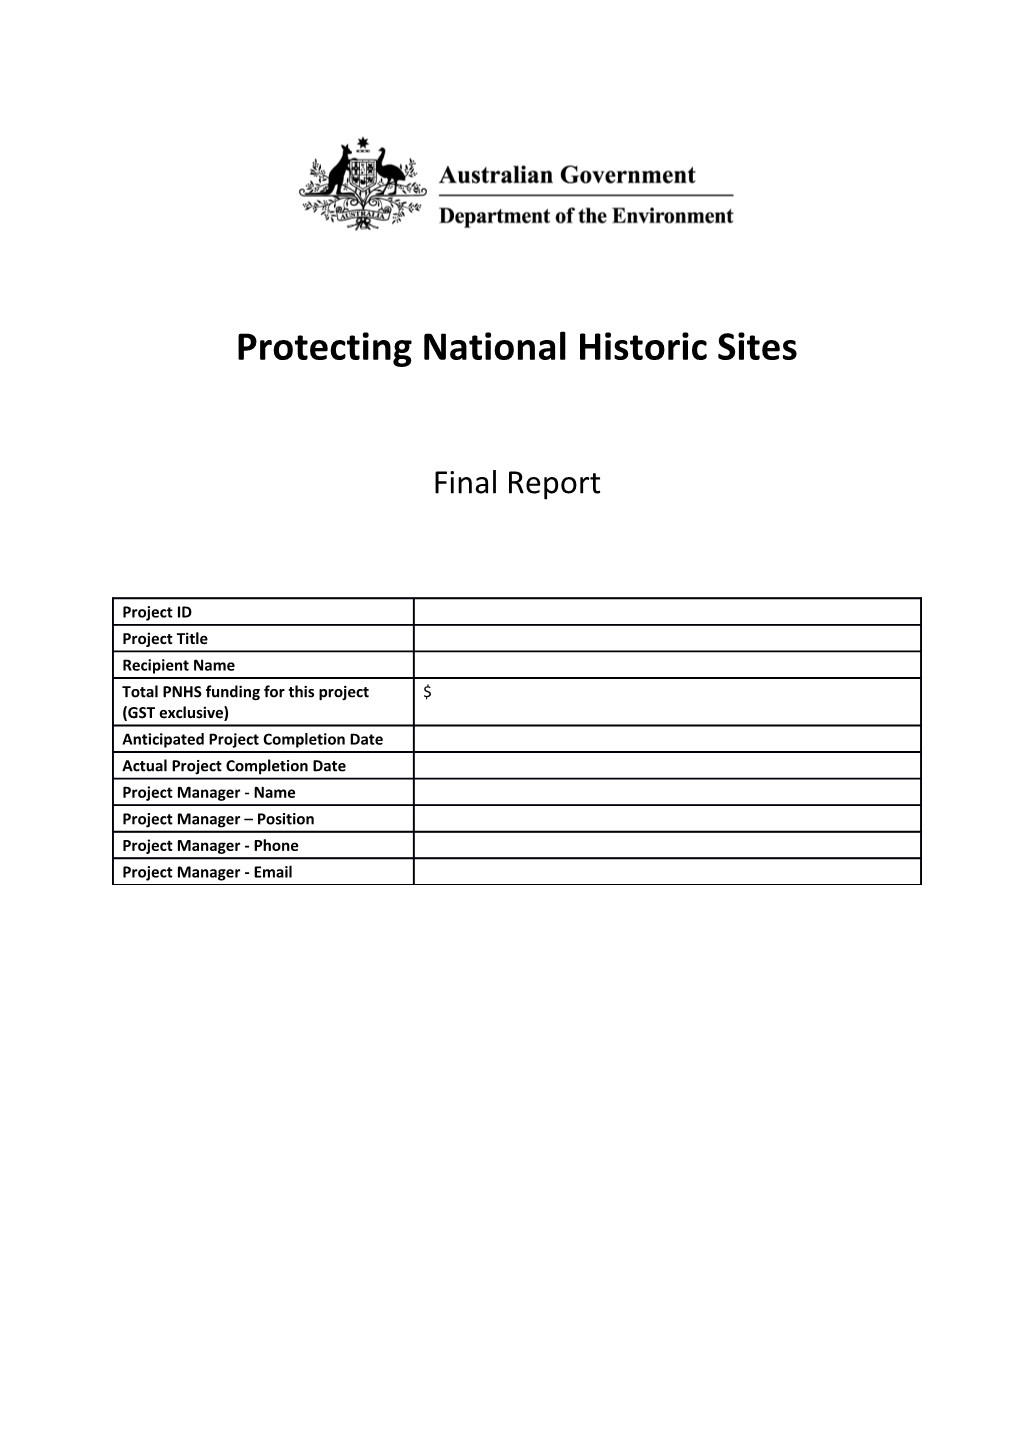 Protecting National Historic Sites - Final Report